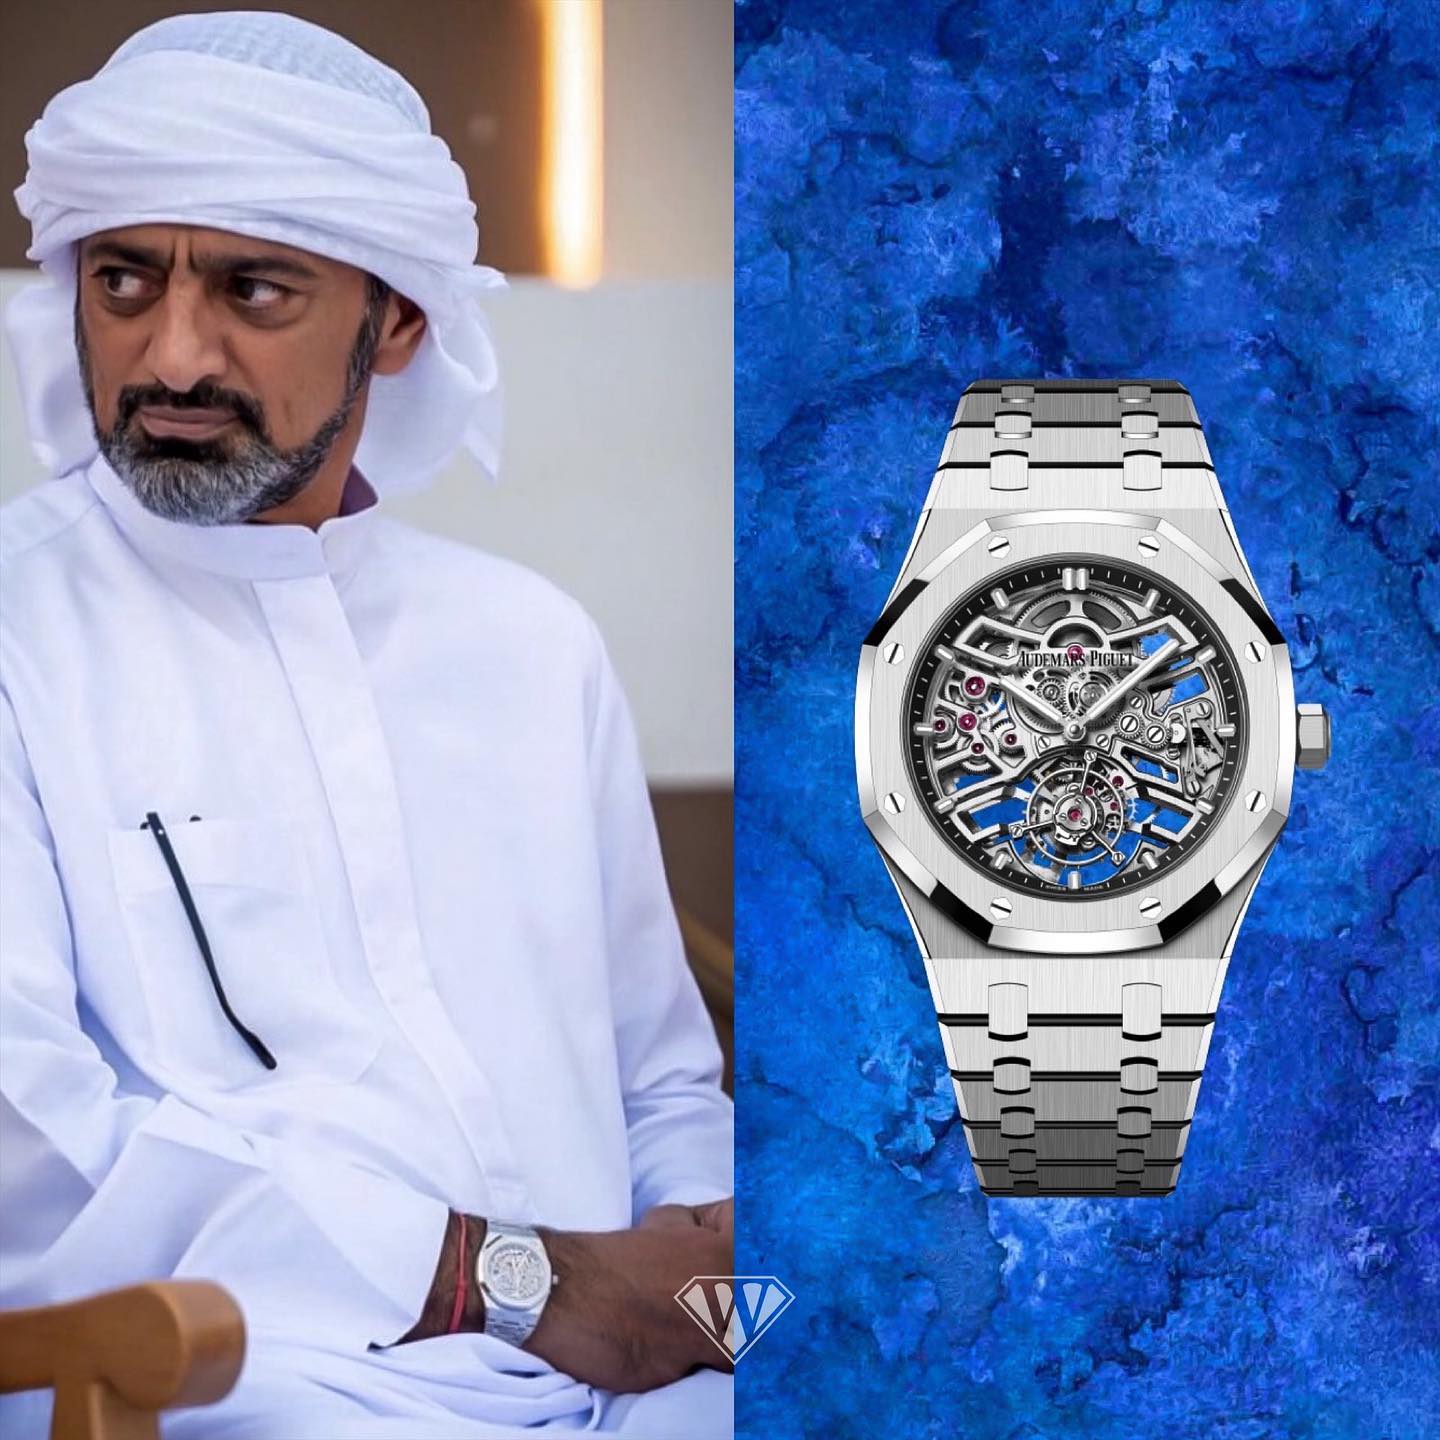 Sheikh Ammar has added a new piece to his collection - Superwatch